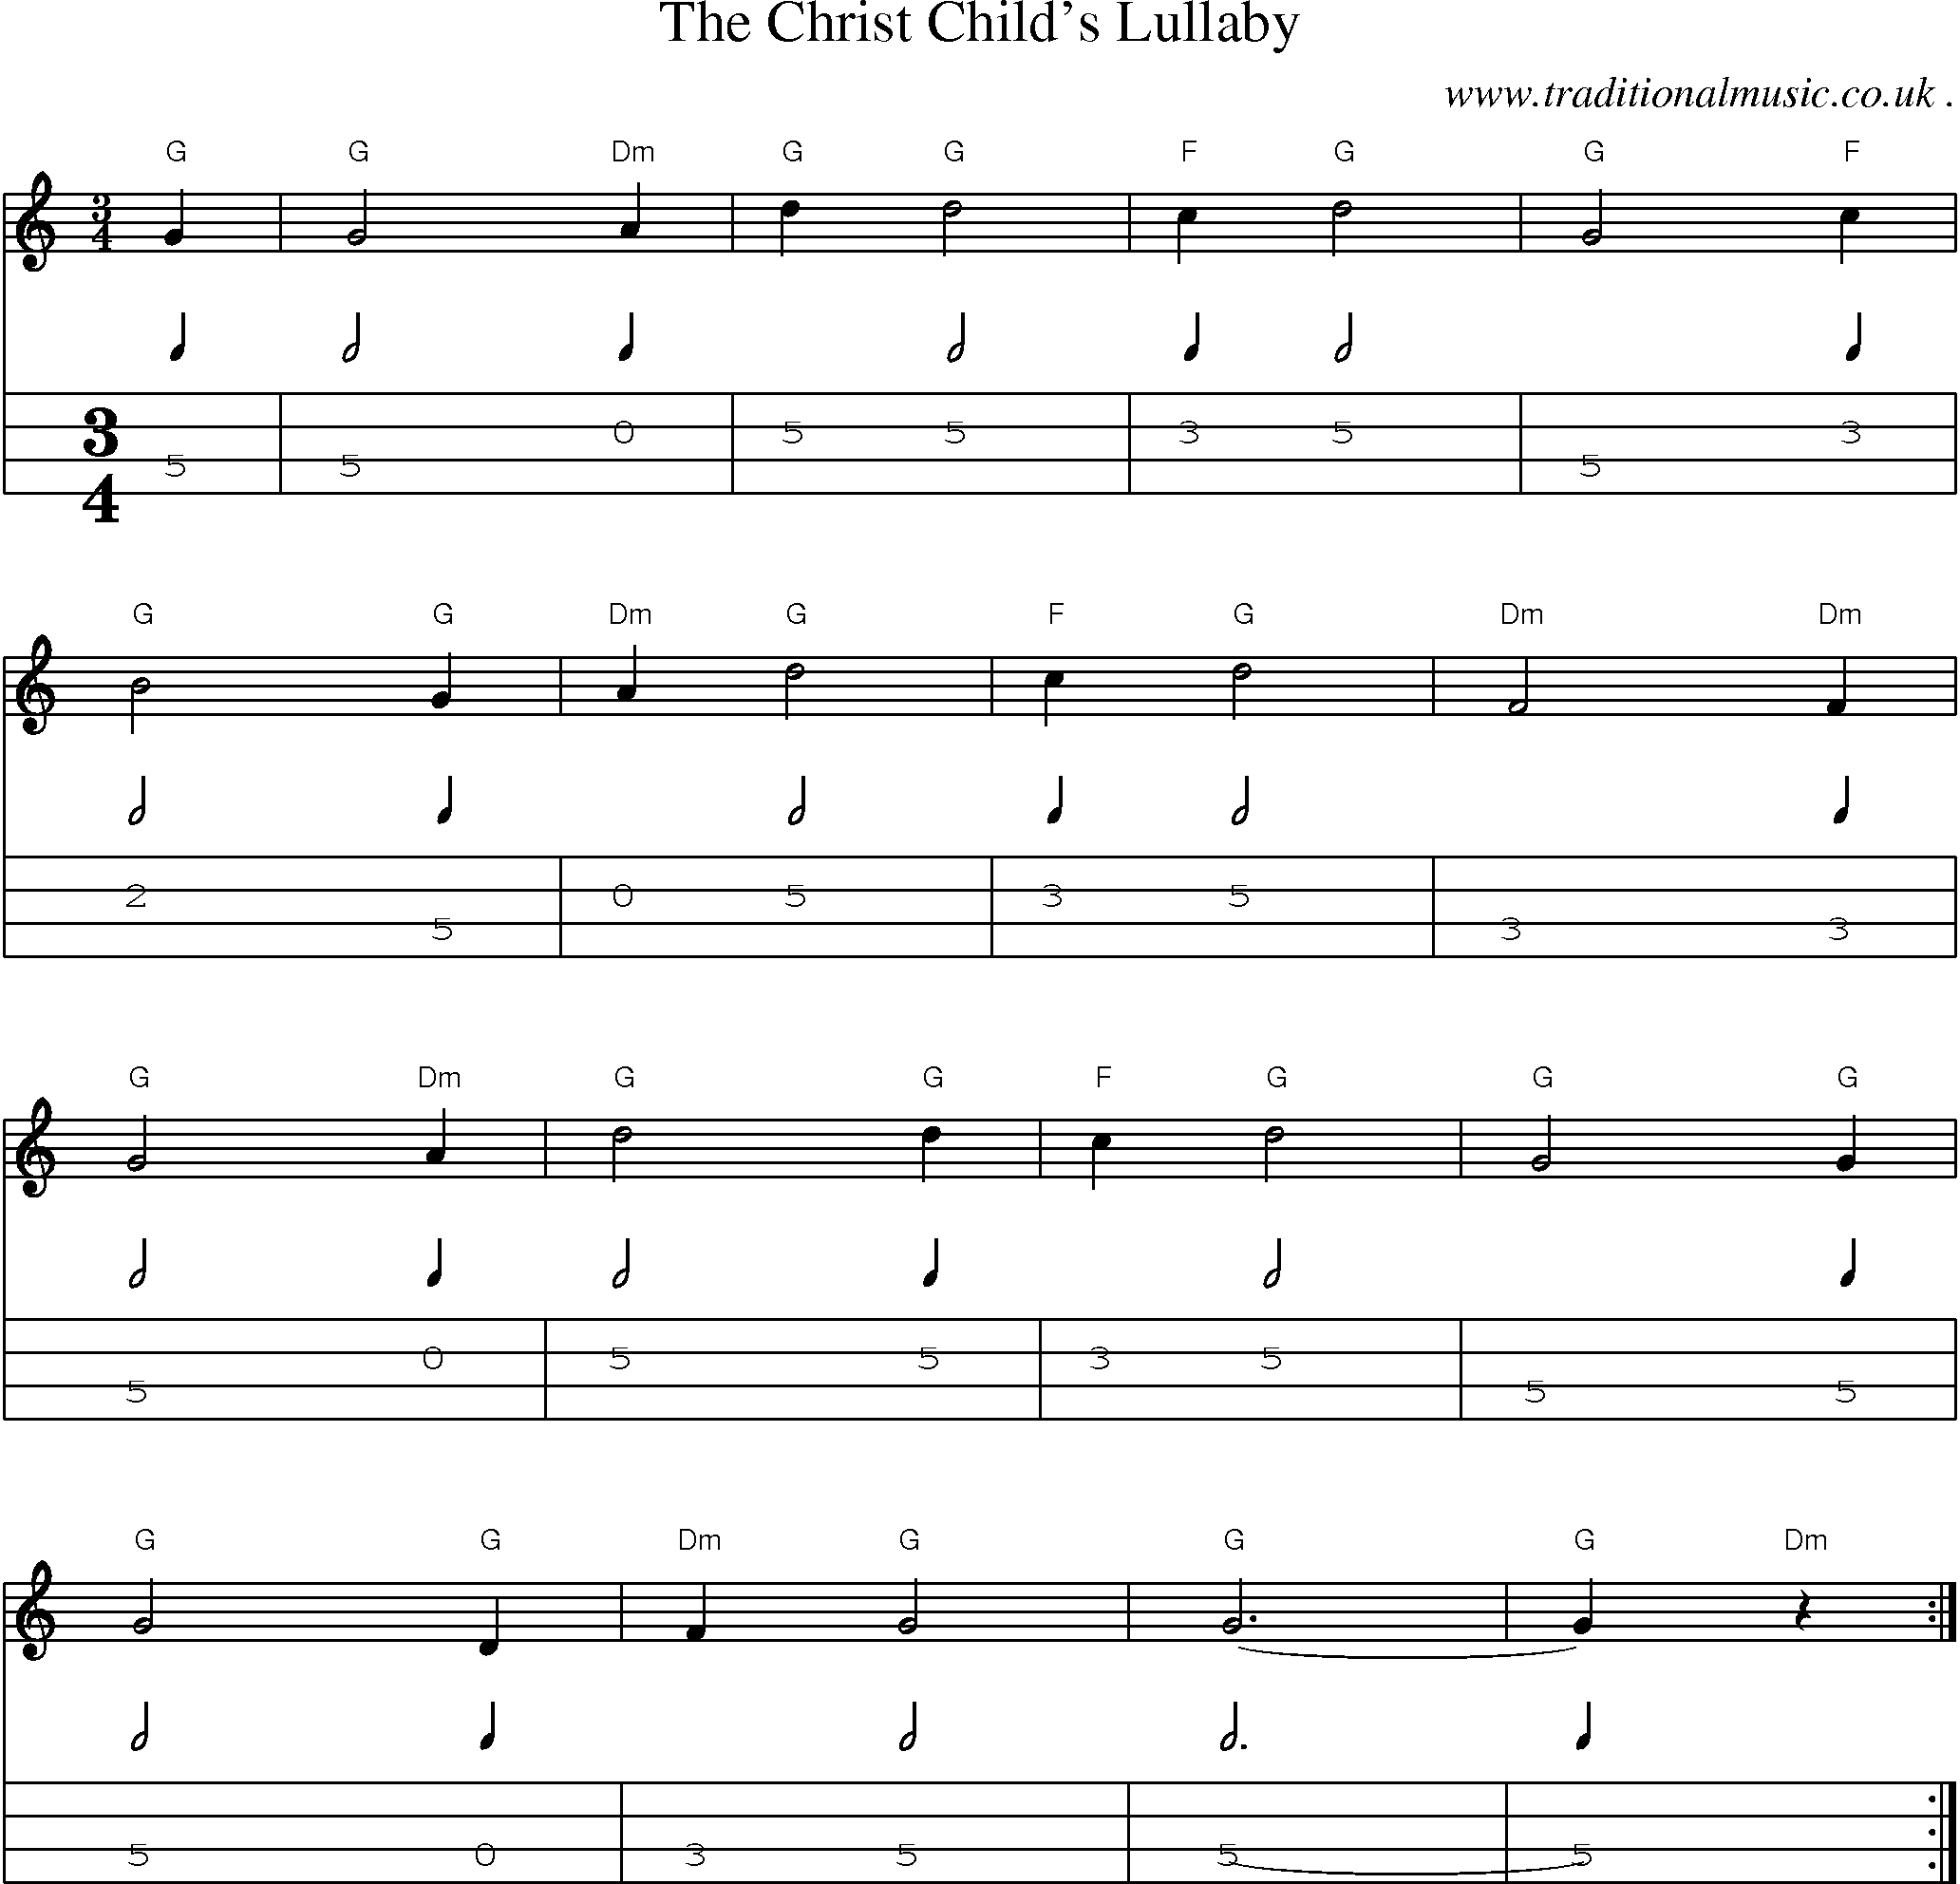 Music Score and Guitar Tabs for The Christ Childs Lullaby